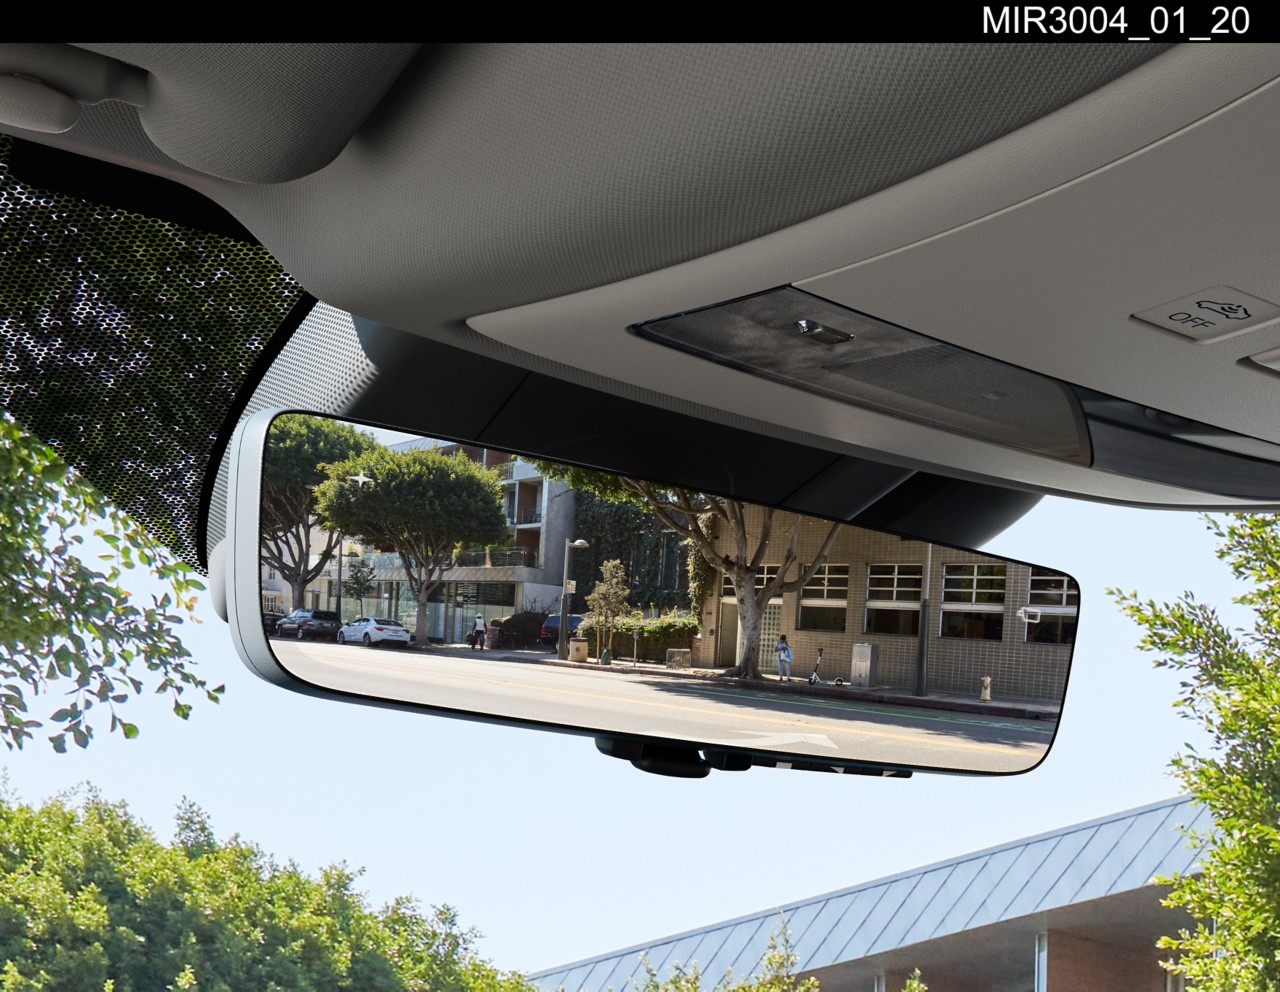 Detail image of the rear-view mirror.